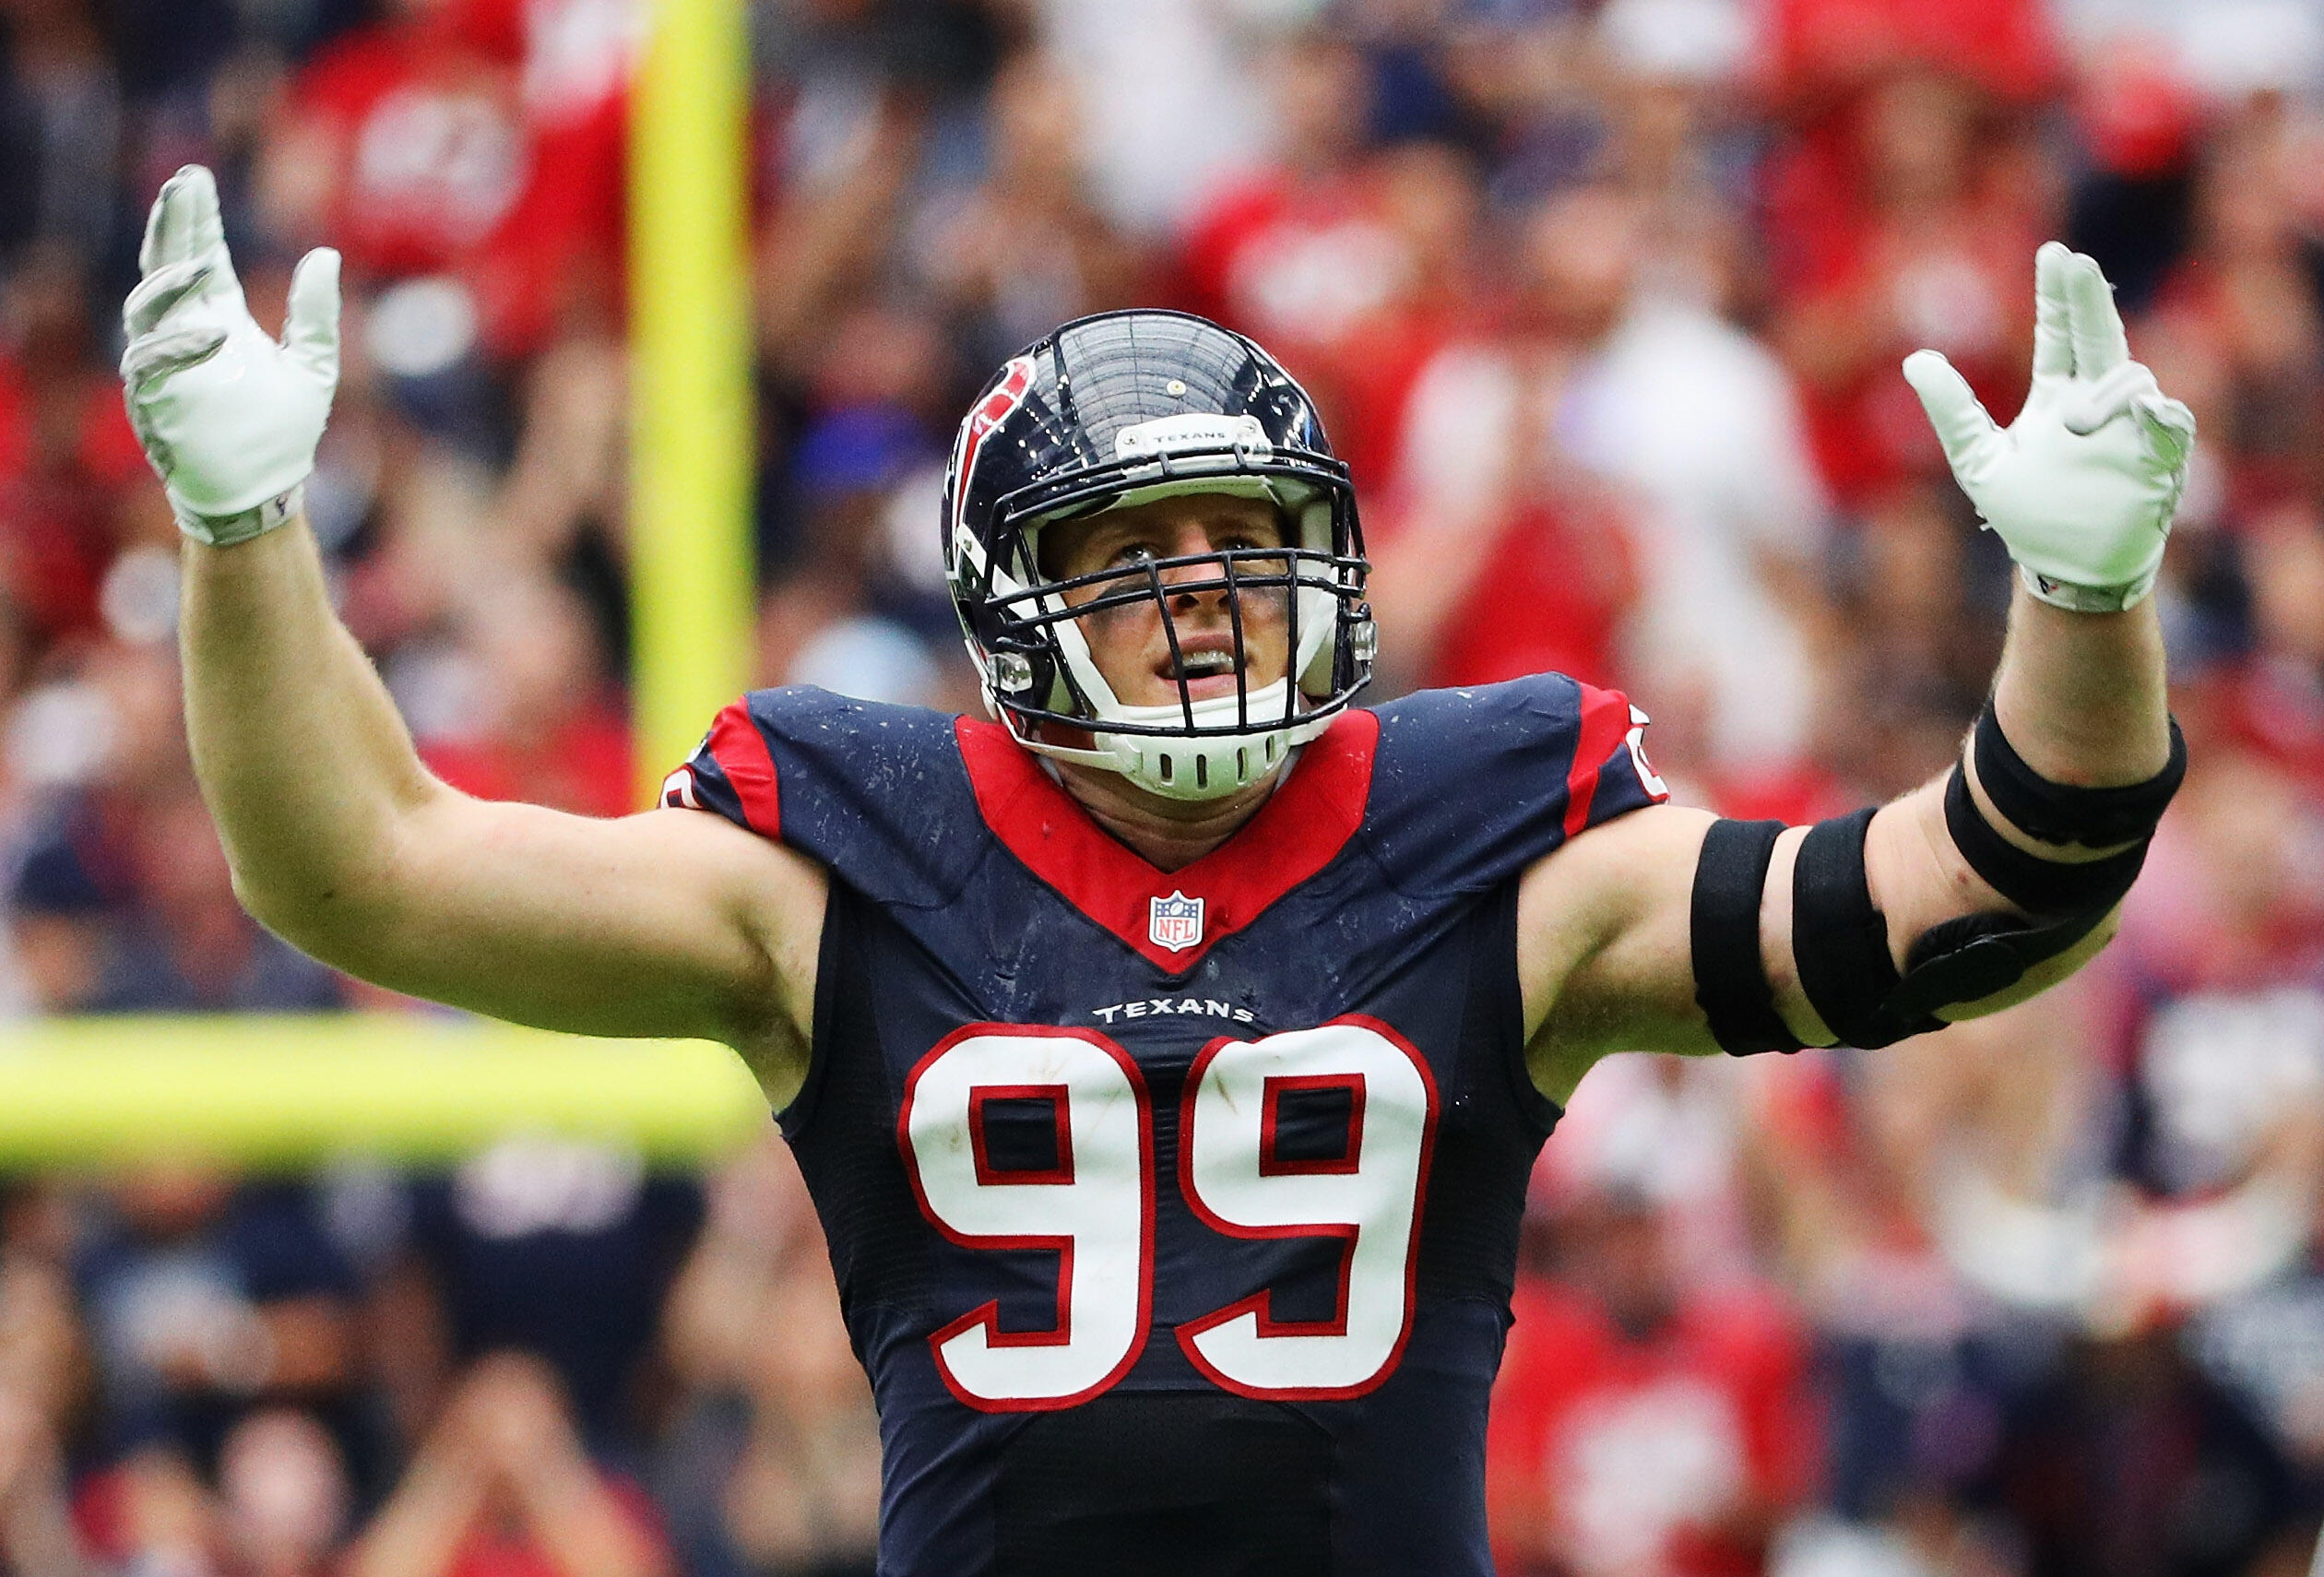 HOUSTON, TX - SEPTEMBER 18:  J.J. Watt #99 of the Houston Texans waits for a play in the fourth quarter of their game against the Kansas City Chiefs at NRG Stadium on September 18, 2016 in Houston, Texas.  (Photo by Scott Halleran/Getty Images)